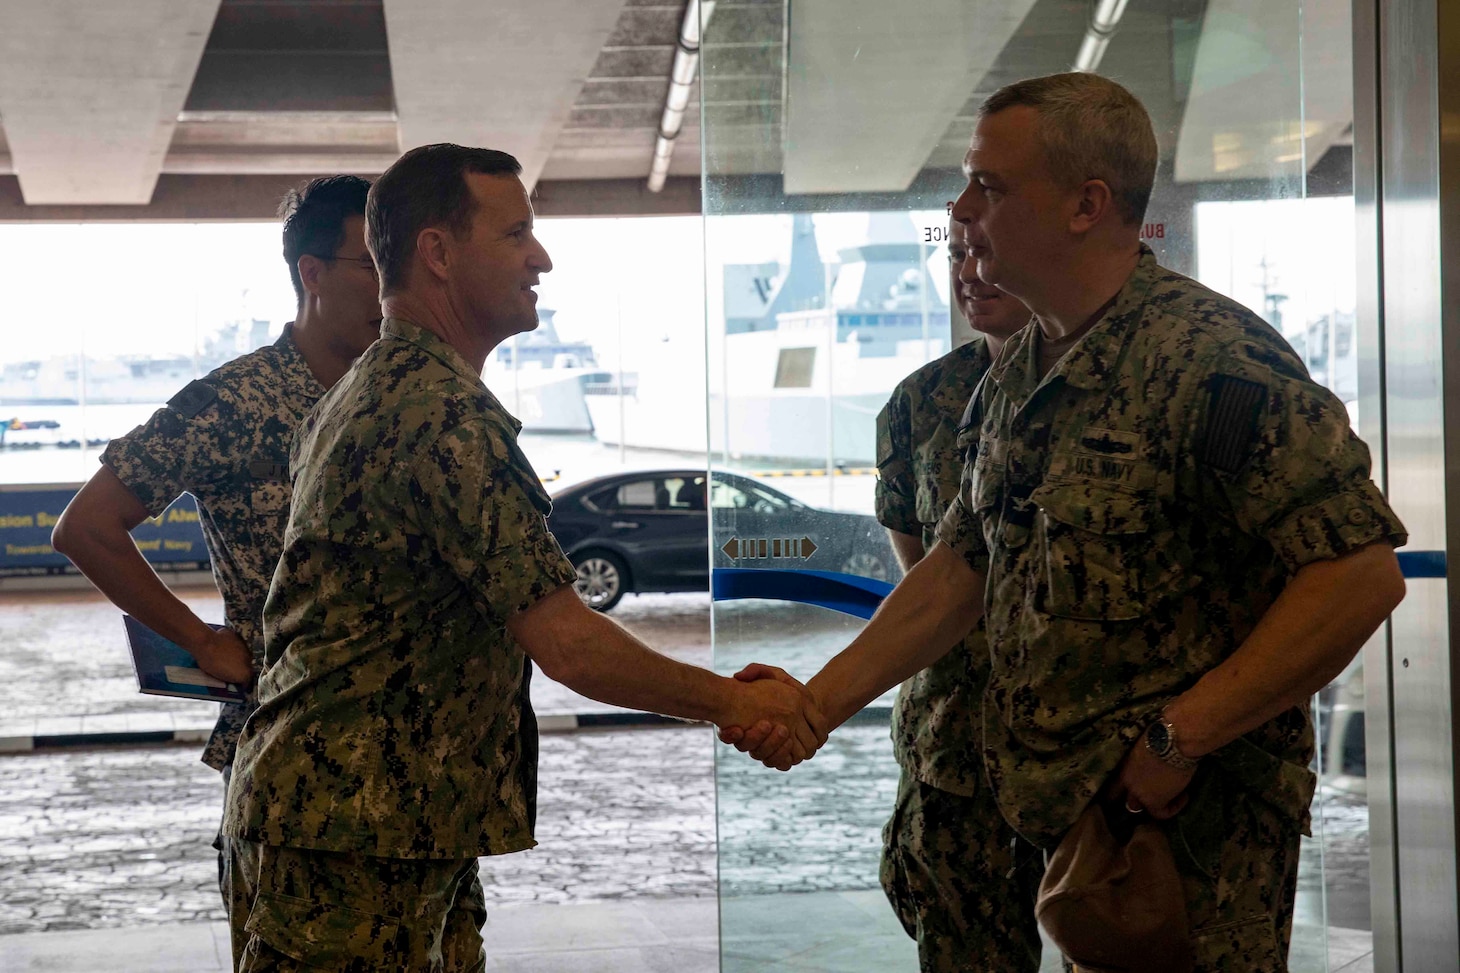 SINGAPORE (Jan. 9, 2023) Rear Adm. Mark Melson, Commander, Logistics Group Western Pacific/Task Force 73, and Capt. Justin Kubu, commodore of Amphibious Squadron SEVEN, shake hands during the opening ceremony of Cooperation Afloat Readiness and Training (CARAT)/Marine Exercise (MAREX) Singapore 2022, Jan. 9, 2023. CARAT Singapore is a bilateral exercise between Singapore and the United States designed to promote regional security cooperation, maintain and strengthen maritime partnerships, and enhance maritime cooperation. In its 28th, the CARAT series is comprised of multinational exercises, designed to enhance U.S. and partner forces’ abilities to operate together in response to traditional and non-traditional maritime security challenges in the Indo-Pacific region. The Makin Island Amphibious Ready Group, comprised of amphibious assault ship USS Makin Island (LHD 8) and amphibious transport dock USS Anchorage (LPD 23) and USS John P. Murtha (LPD 26), is operating in the U.S. 7th Fleet area of operations with the embarked 13th Marine Expeditionary Unit to enhance interoperability with Allies and partners and serve as a ready-response force to defend peace and maintain stability in the Indo-Pacific region. (U.S. Navy photo by Mass Communication Specialist 3rd Class Kendra Helmbrecht)